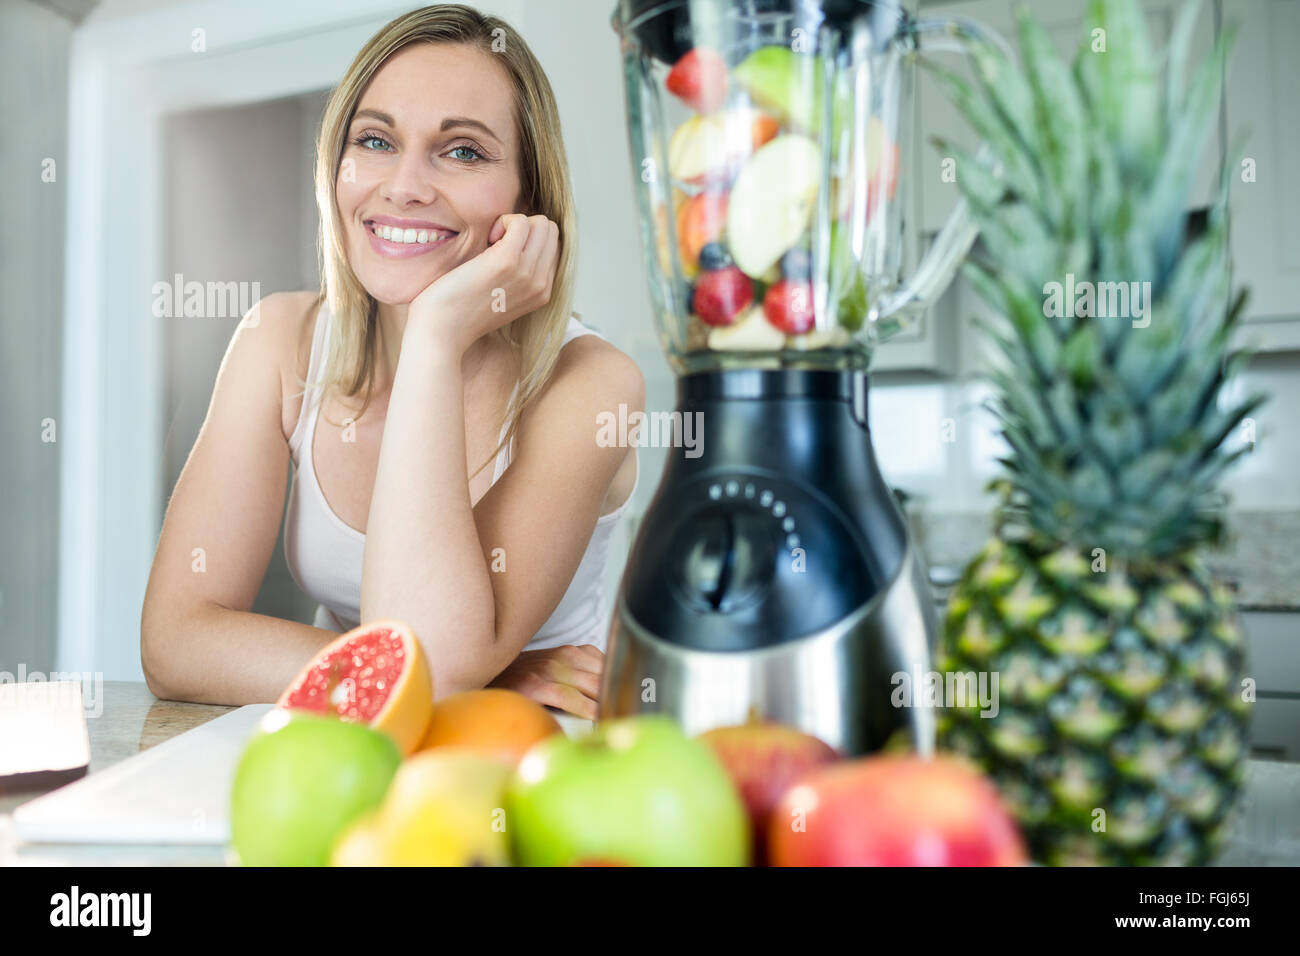 Pretty blonde woman happy to prepare a smoothie Stock Photo